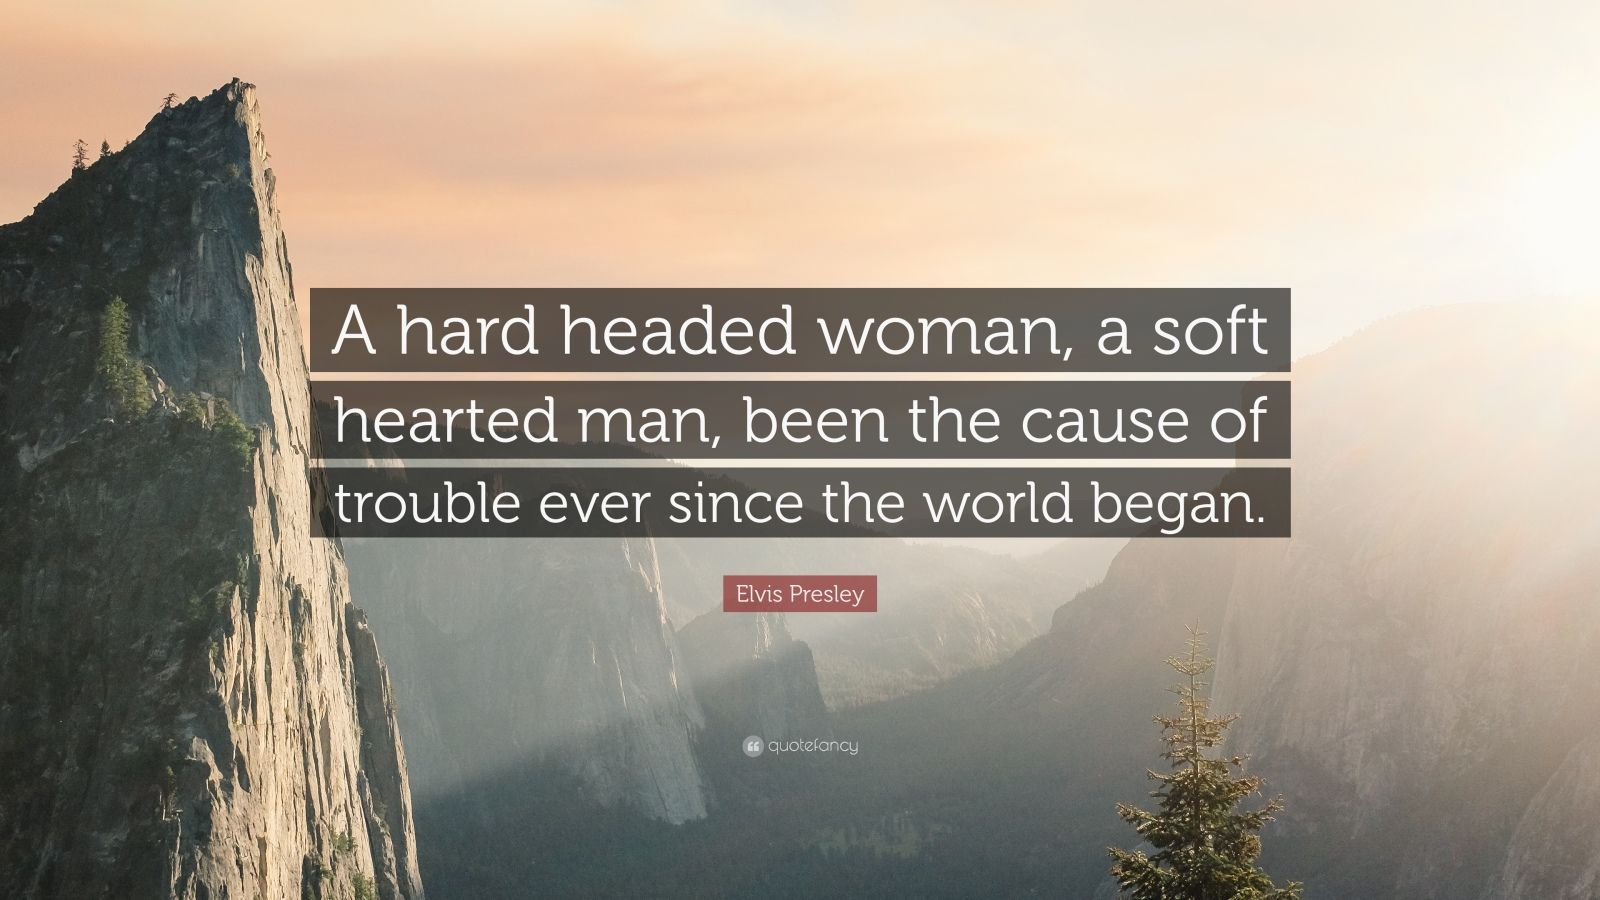 Elvis Presley Quote: “A hard headed woman, a soft hearted man, been the ...